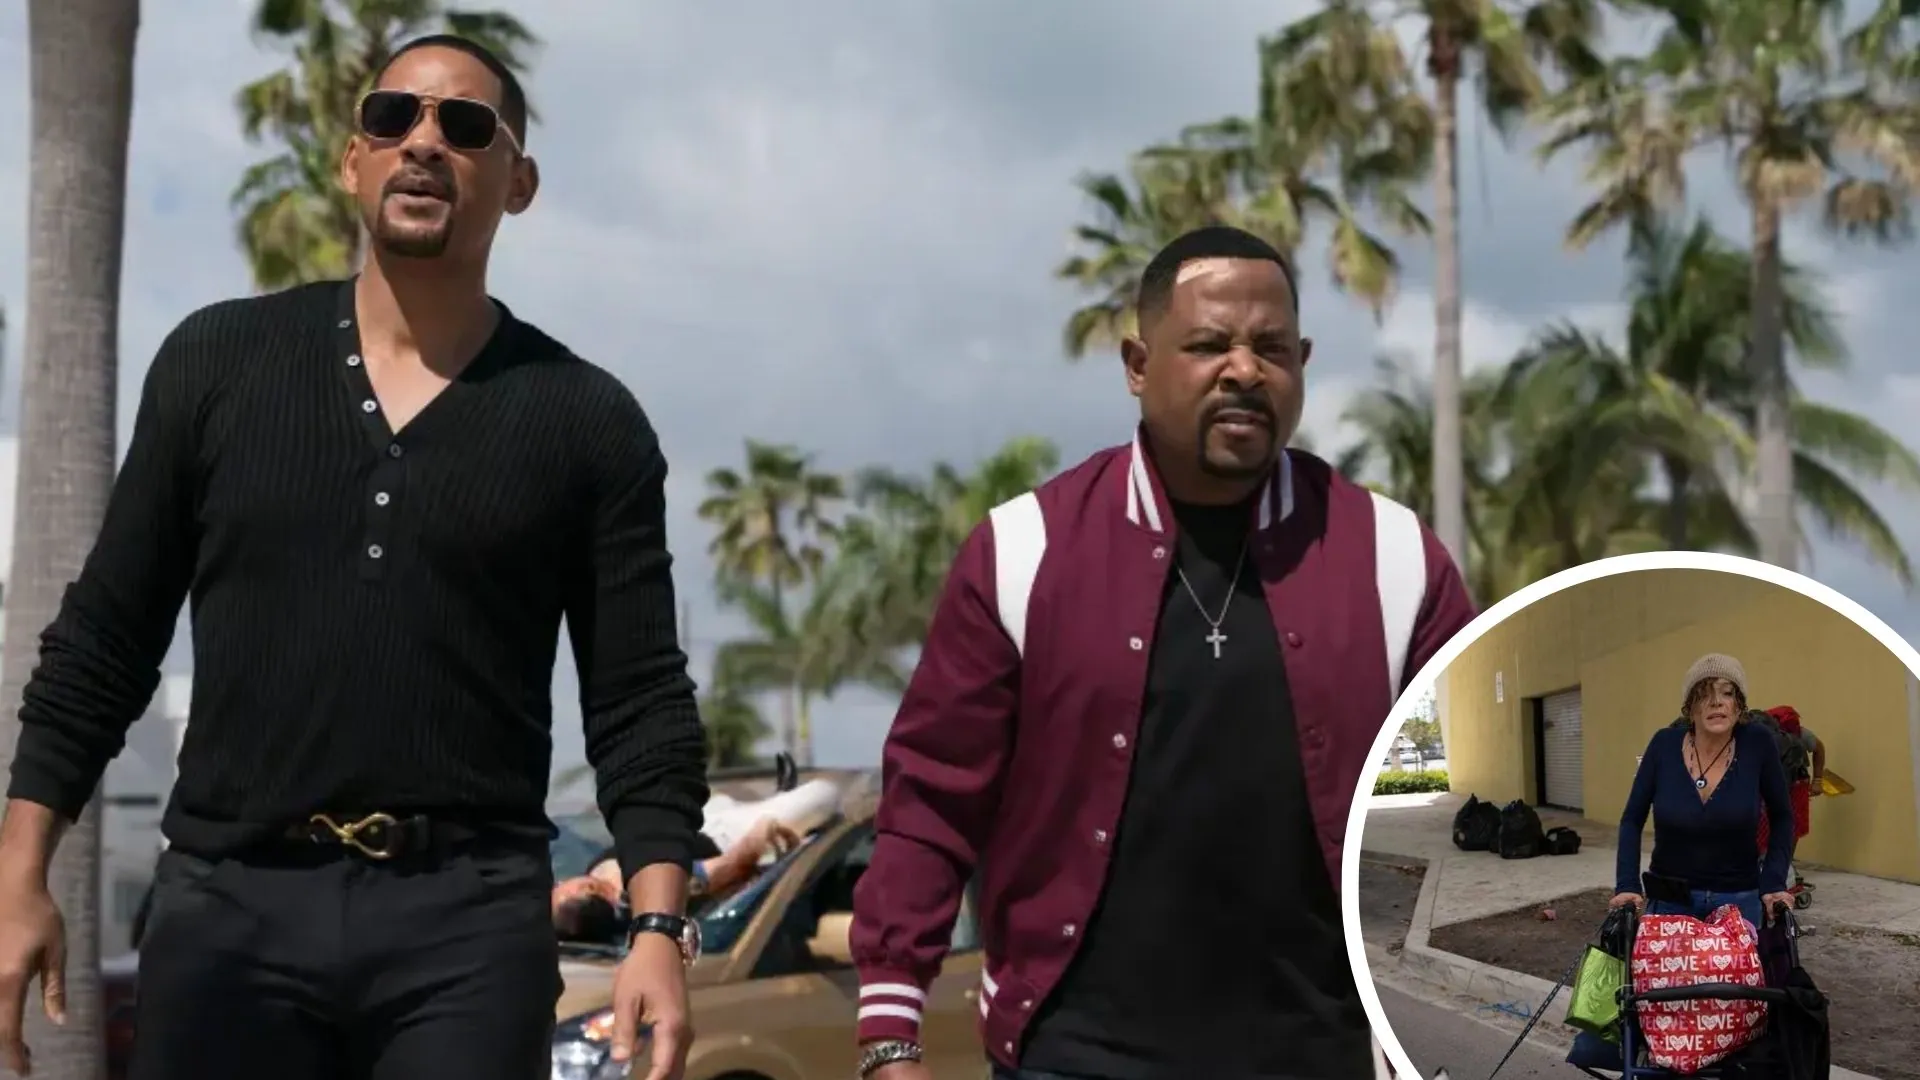 Homeless Forced to Move as 'Bad Boys 4' Films in Downtown Miami